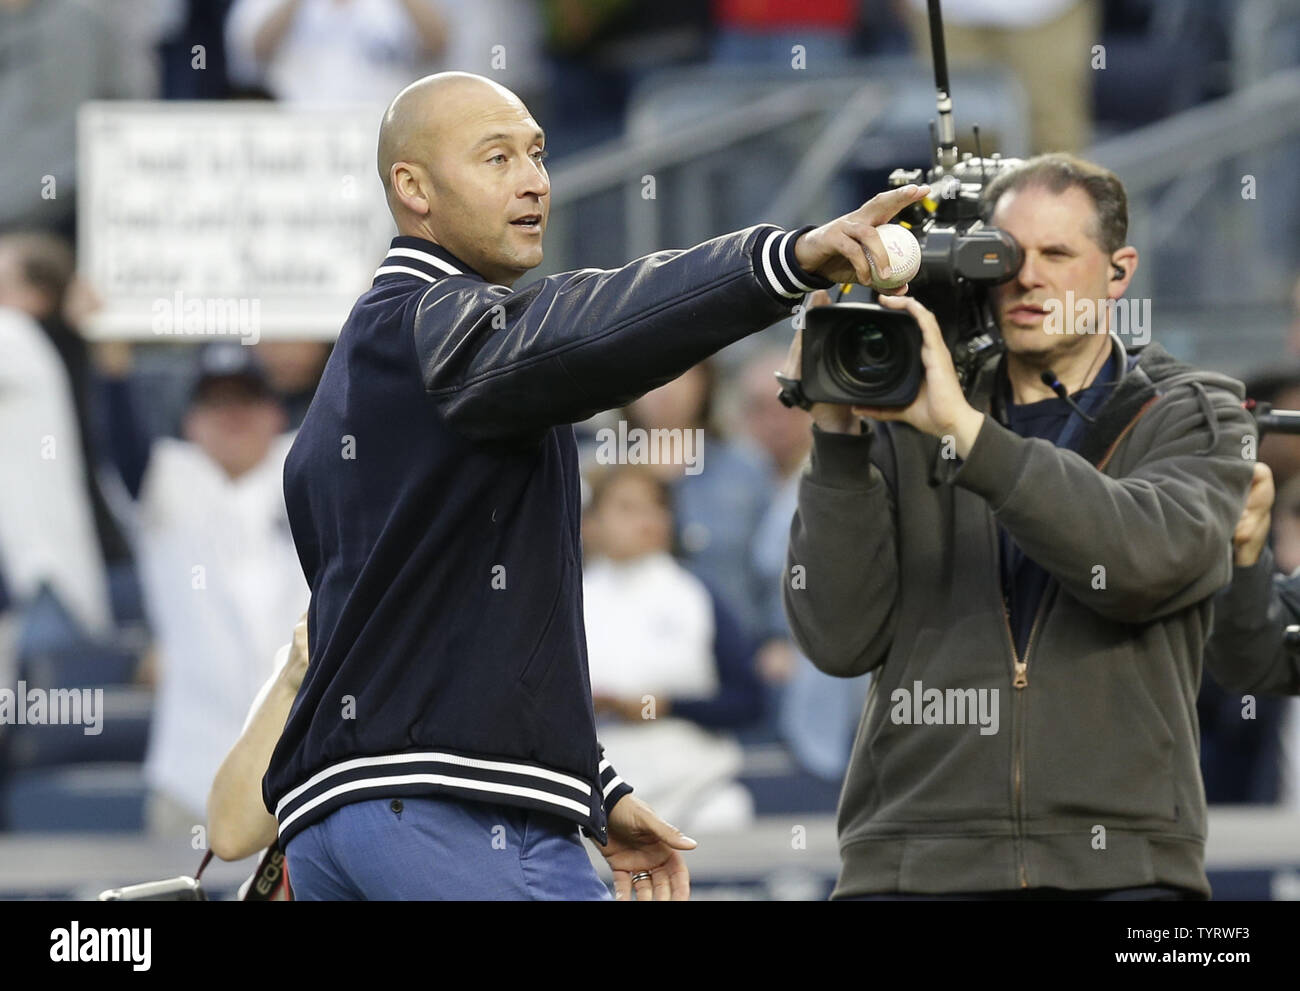 Derek Jeter throws out the first pitch after a ceremony retiring his number before the Houston Astros play the New York Yankees at Yankee Stadium in New York City on May 14, 2017. The New York Yankees former shortstop had his No. 2 retired and was also honored with a plaque in Monument Park.     Photo by John Angelillo/UPI Stock Photo